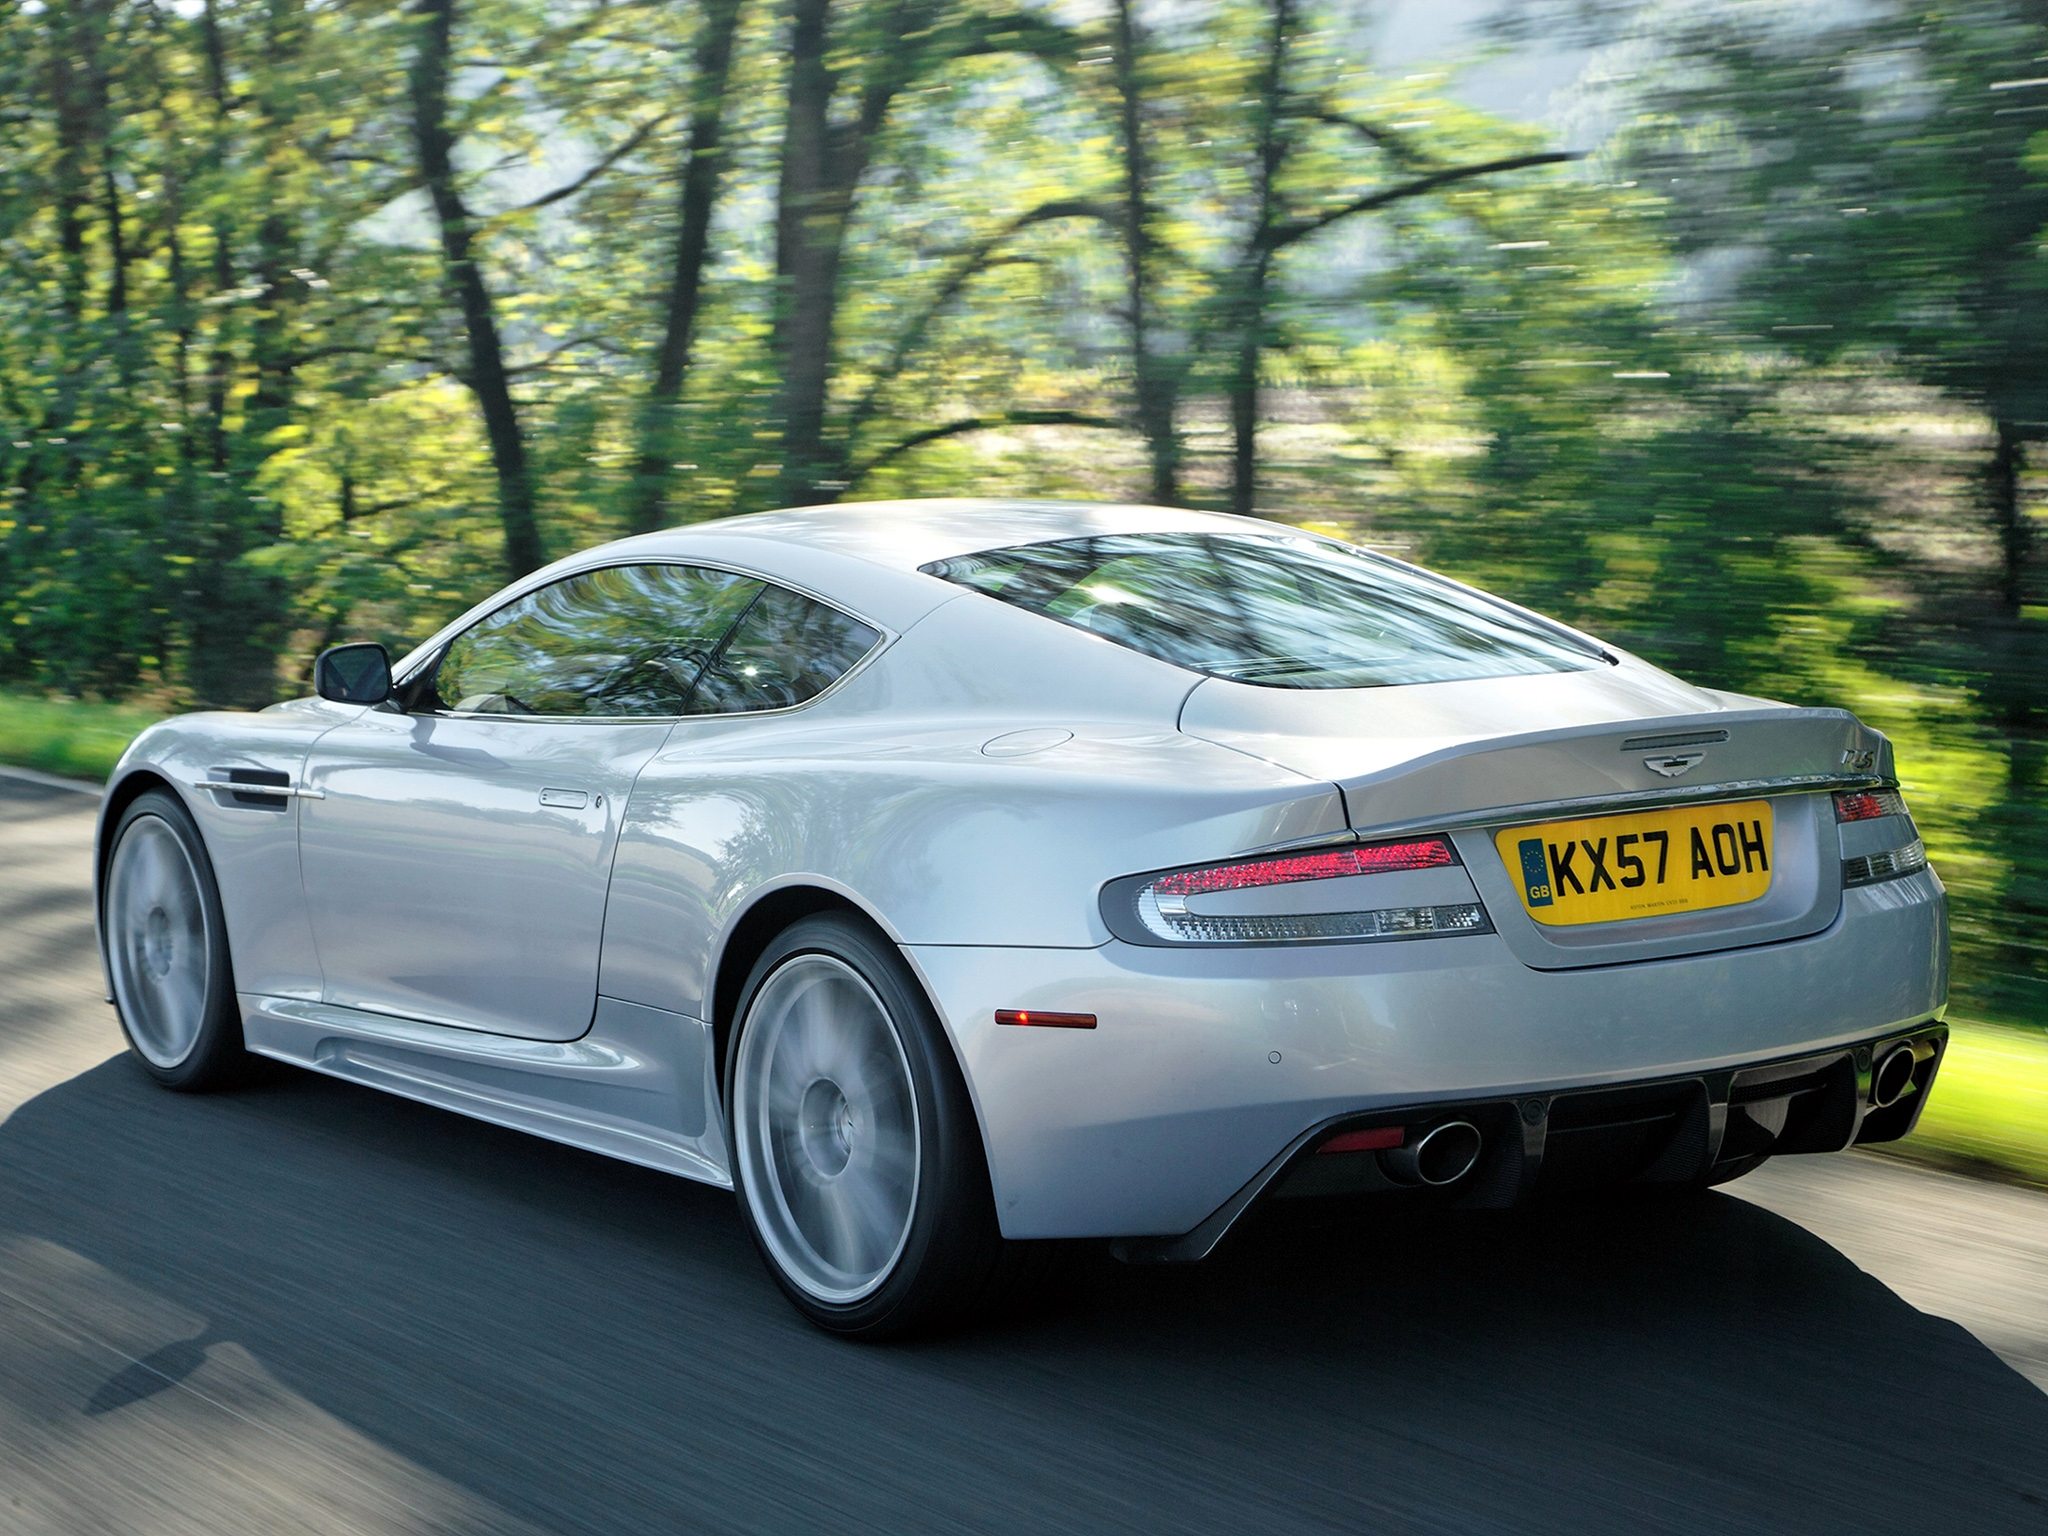 cars, auto, nature, aston martin, white, back view, rear view, dbs, 2008 Phone Background